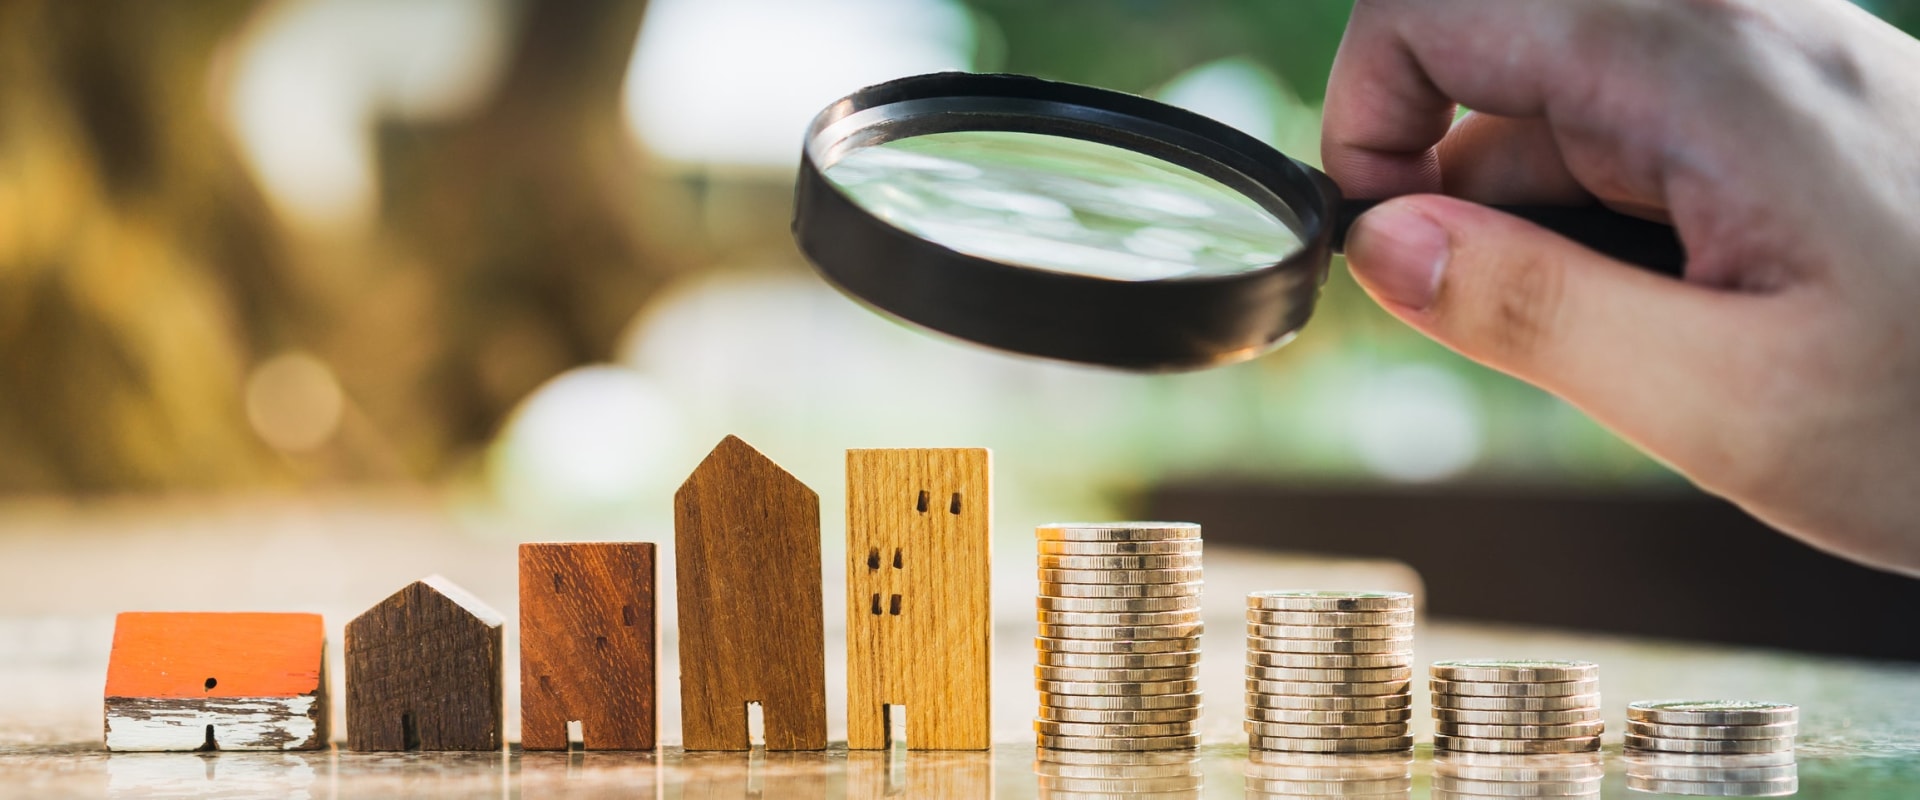 Can investing in real estate make you rich?